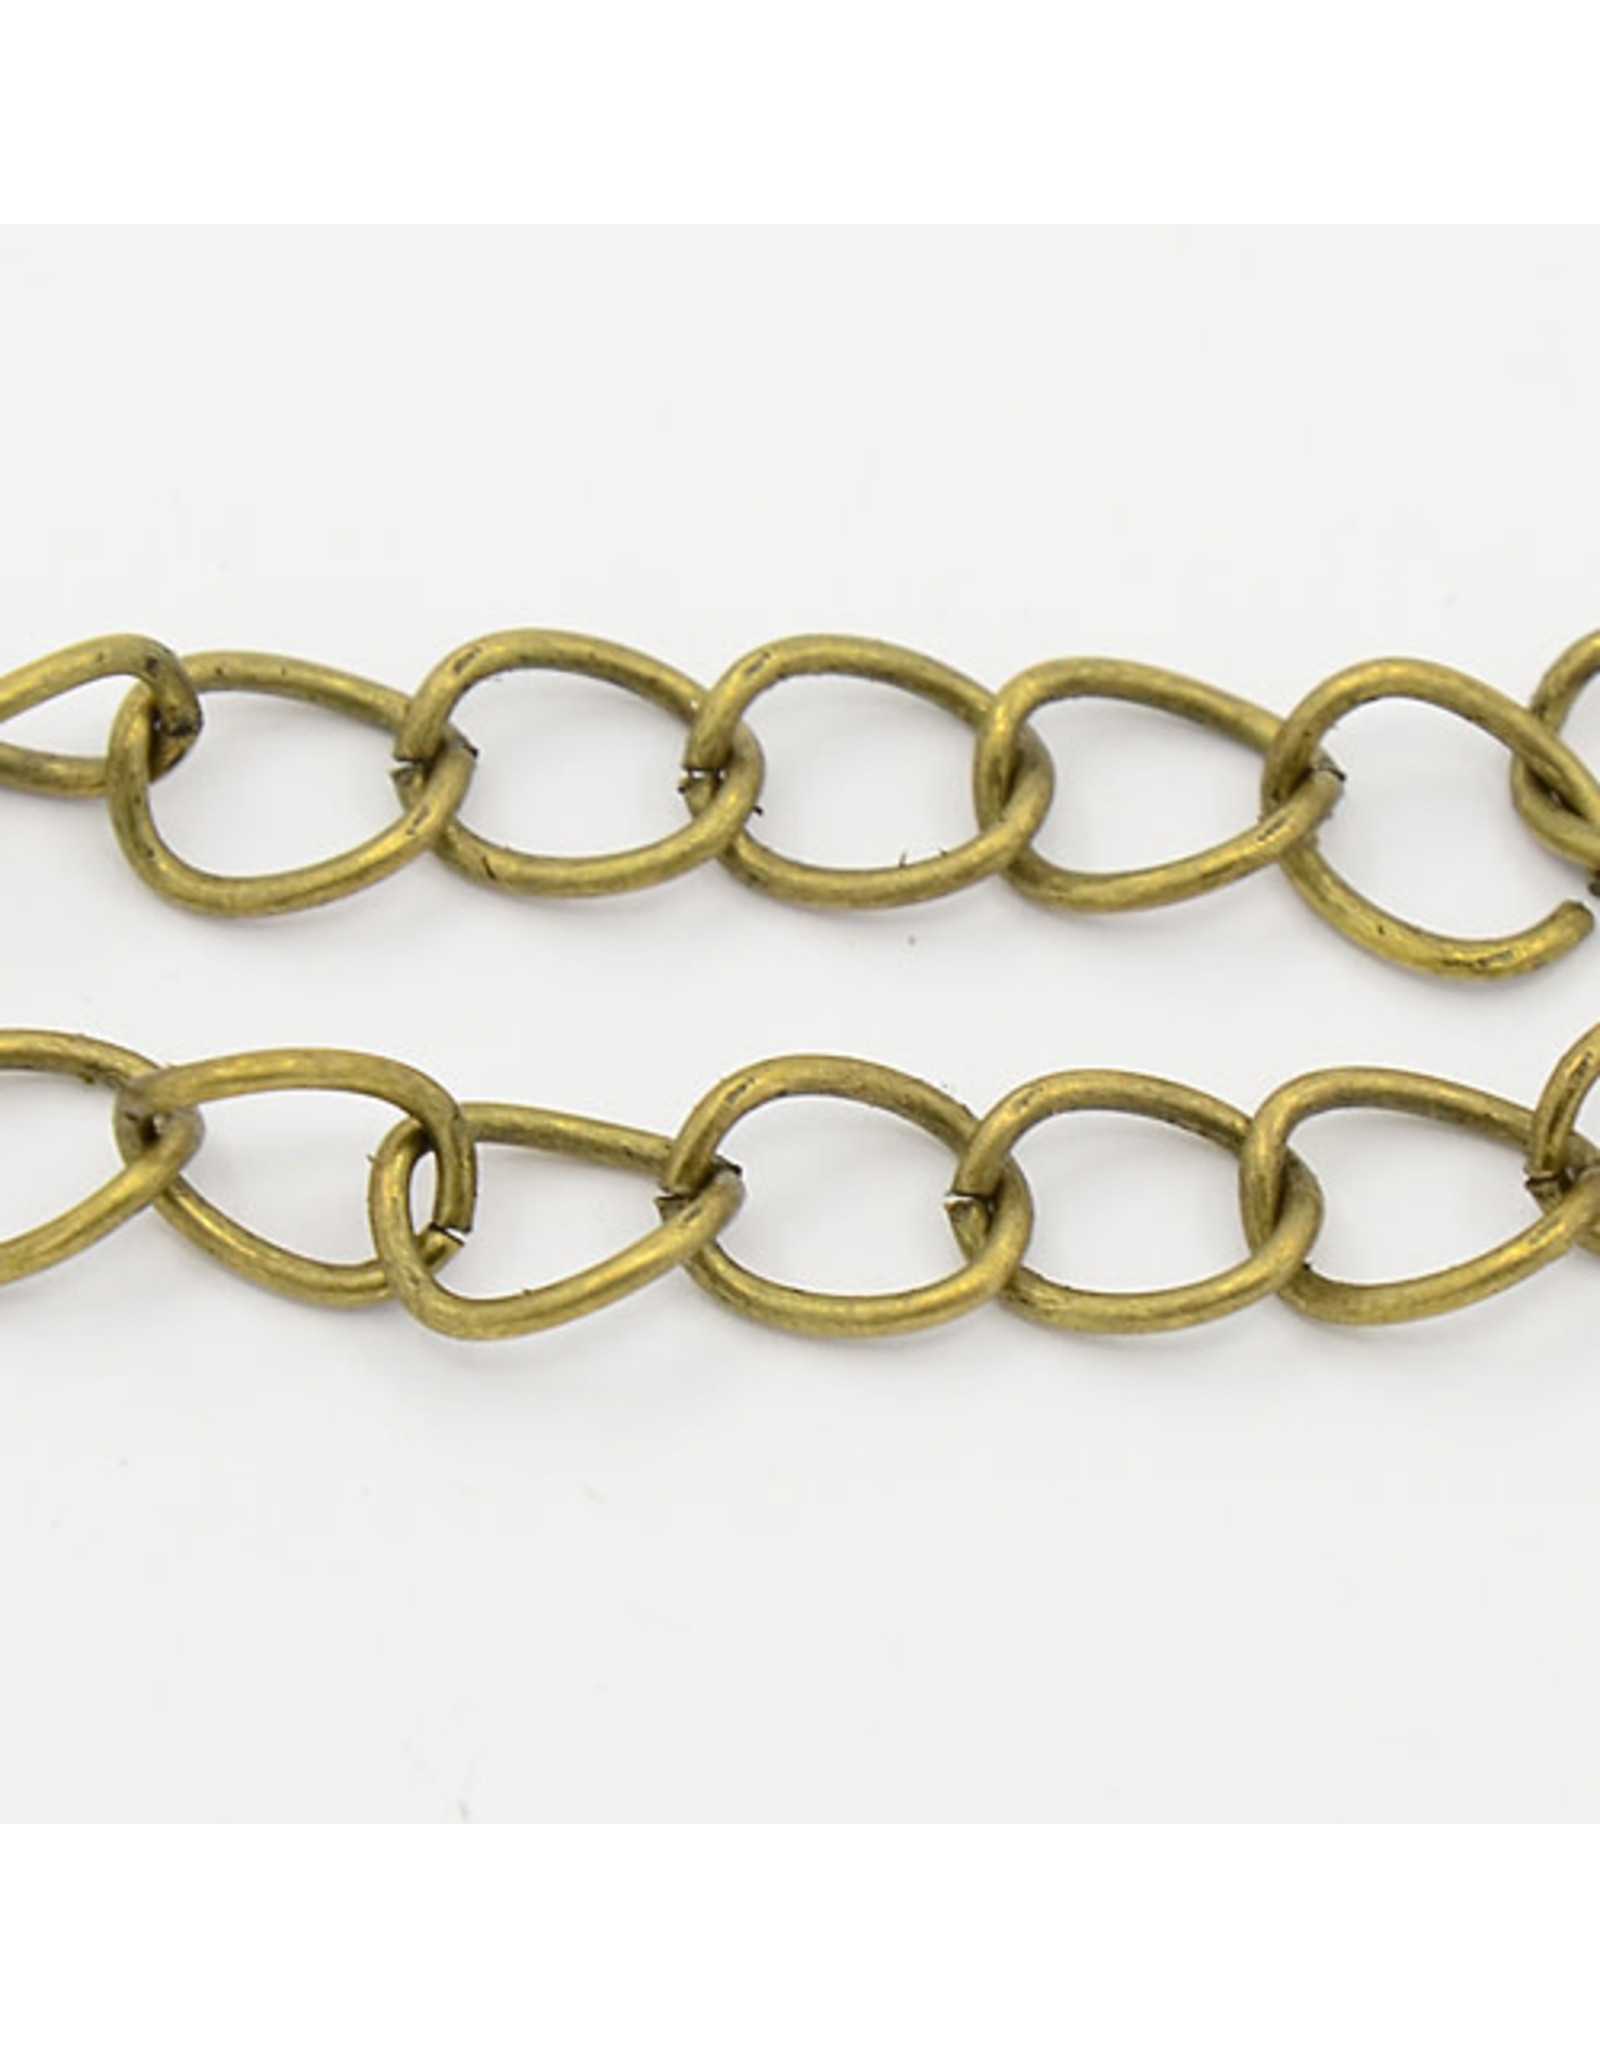 #39 Curb Chain Twisted   8x6mm  Antique Brass 16 Feet  NF